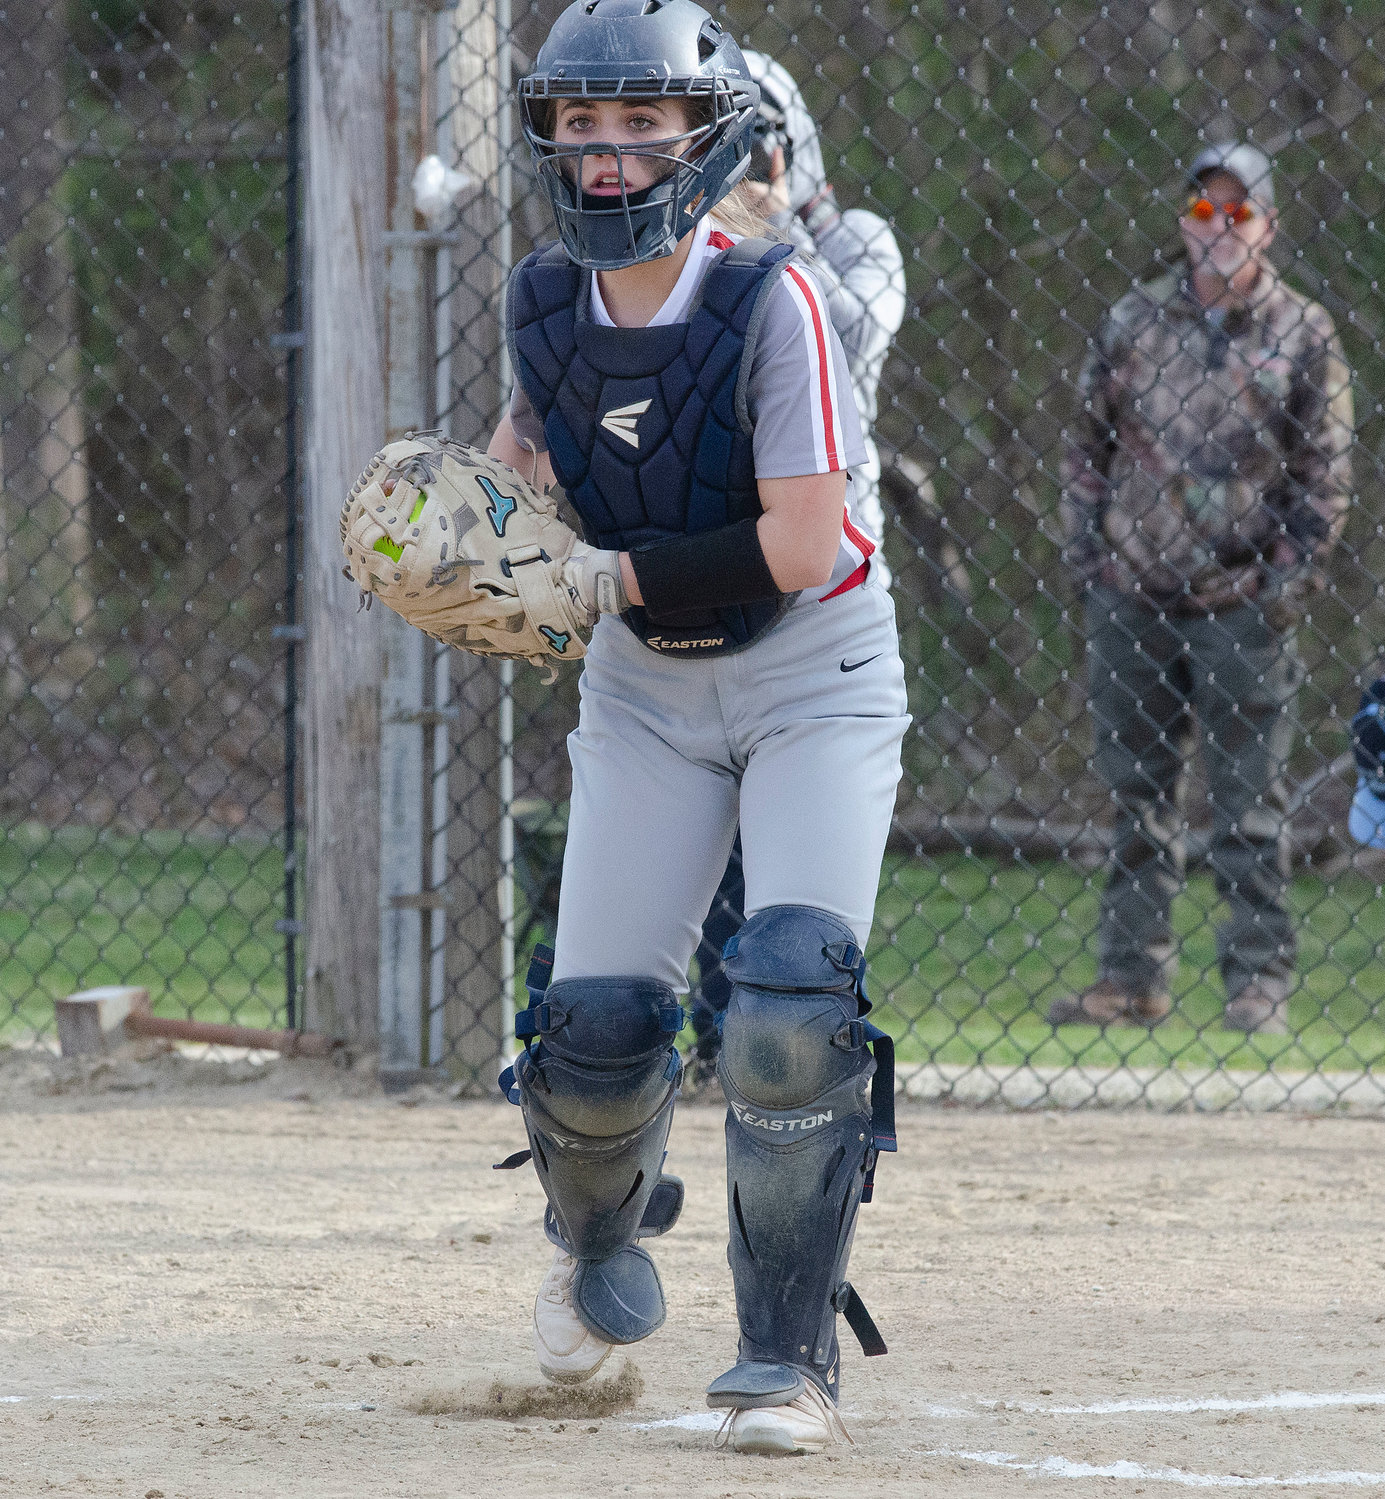 Catcher Ava Mendence looks back a runner after fielding a throw to home plate.